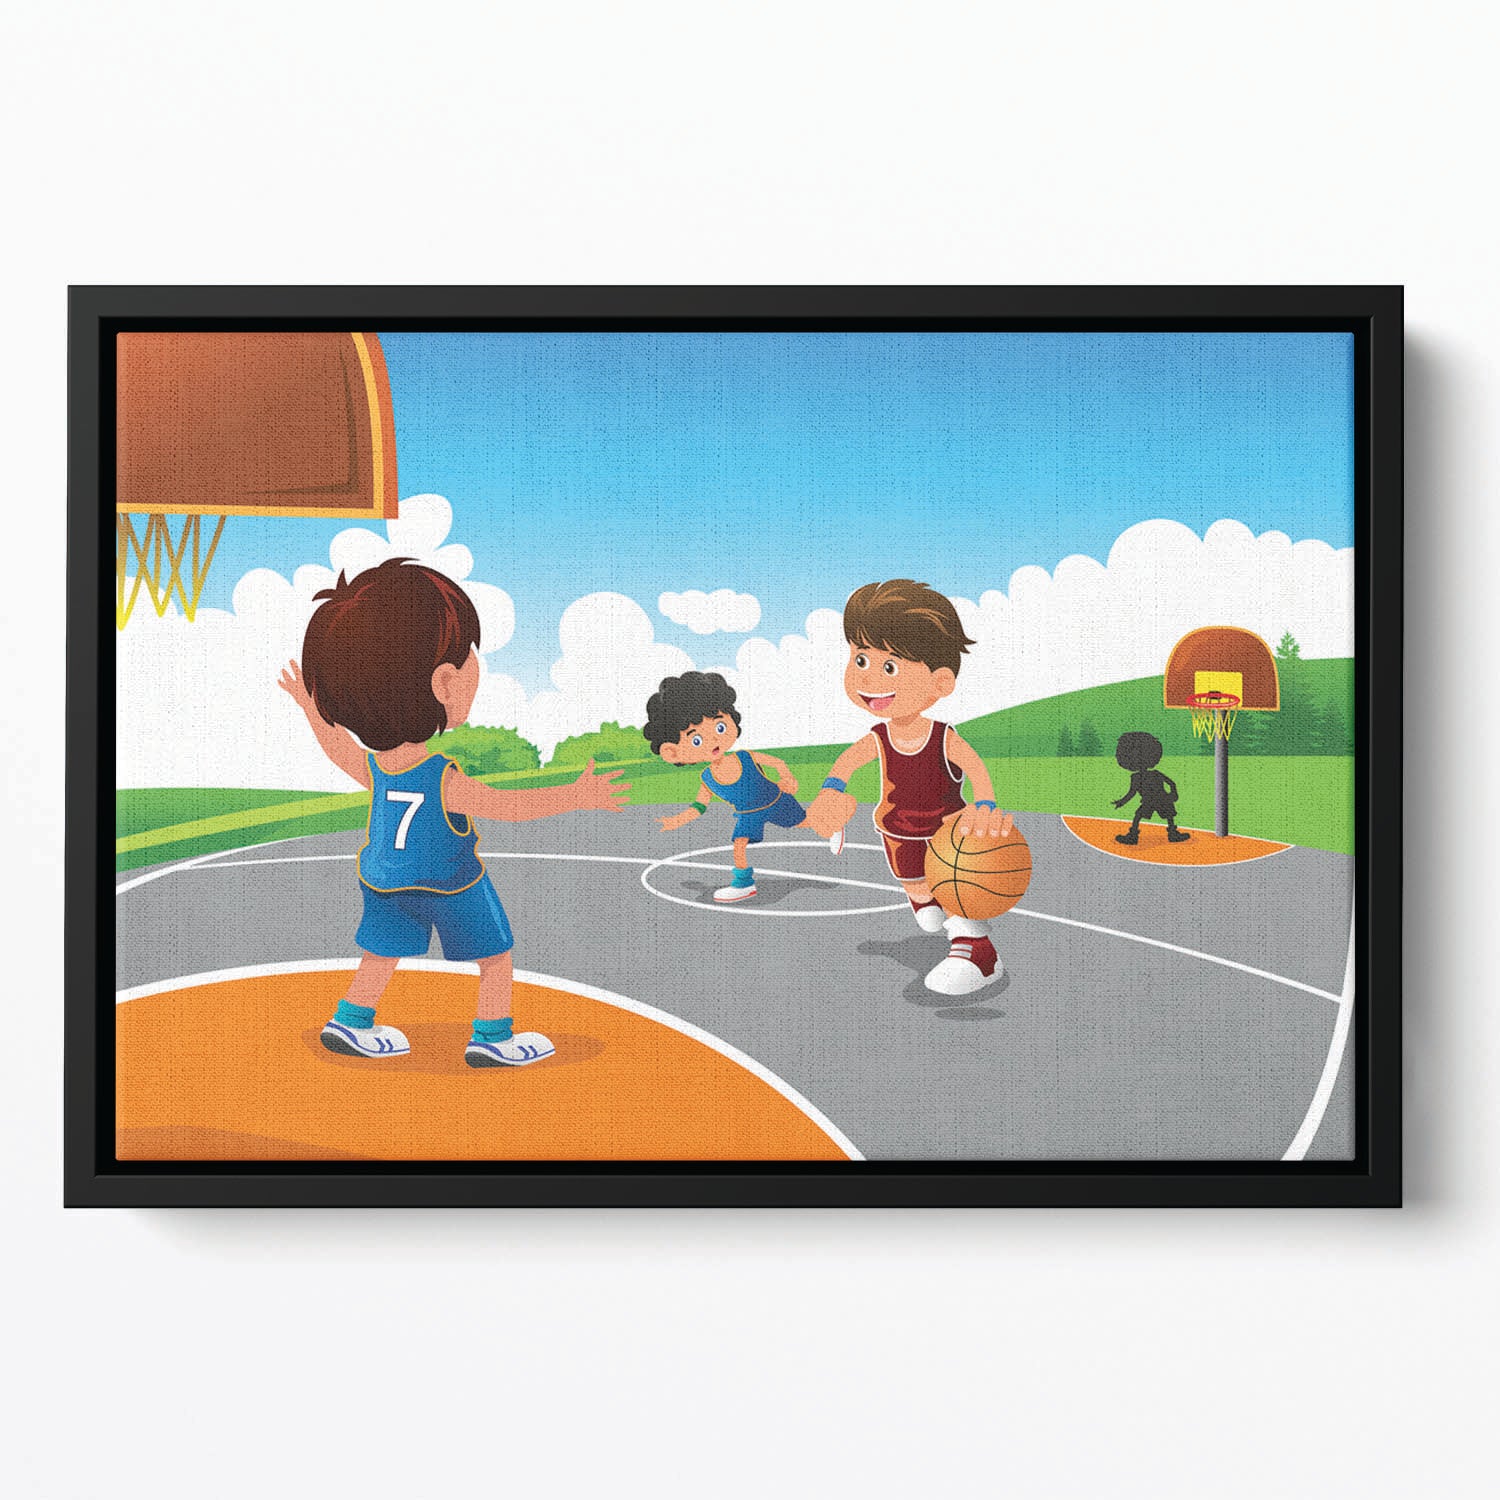 Kids playing basketball in a playground Floating Framed Canvas